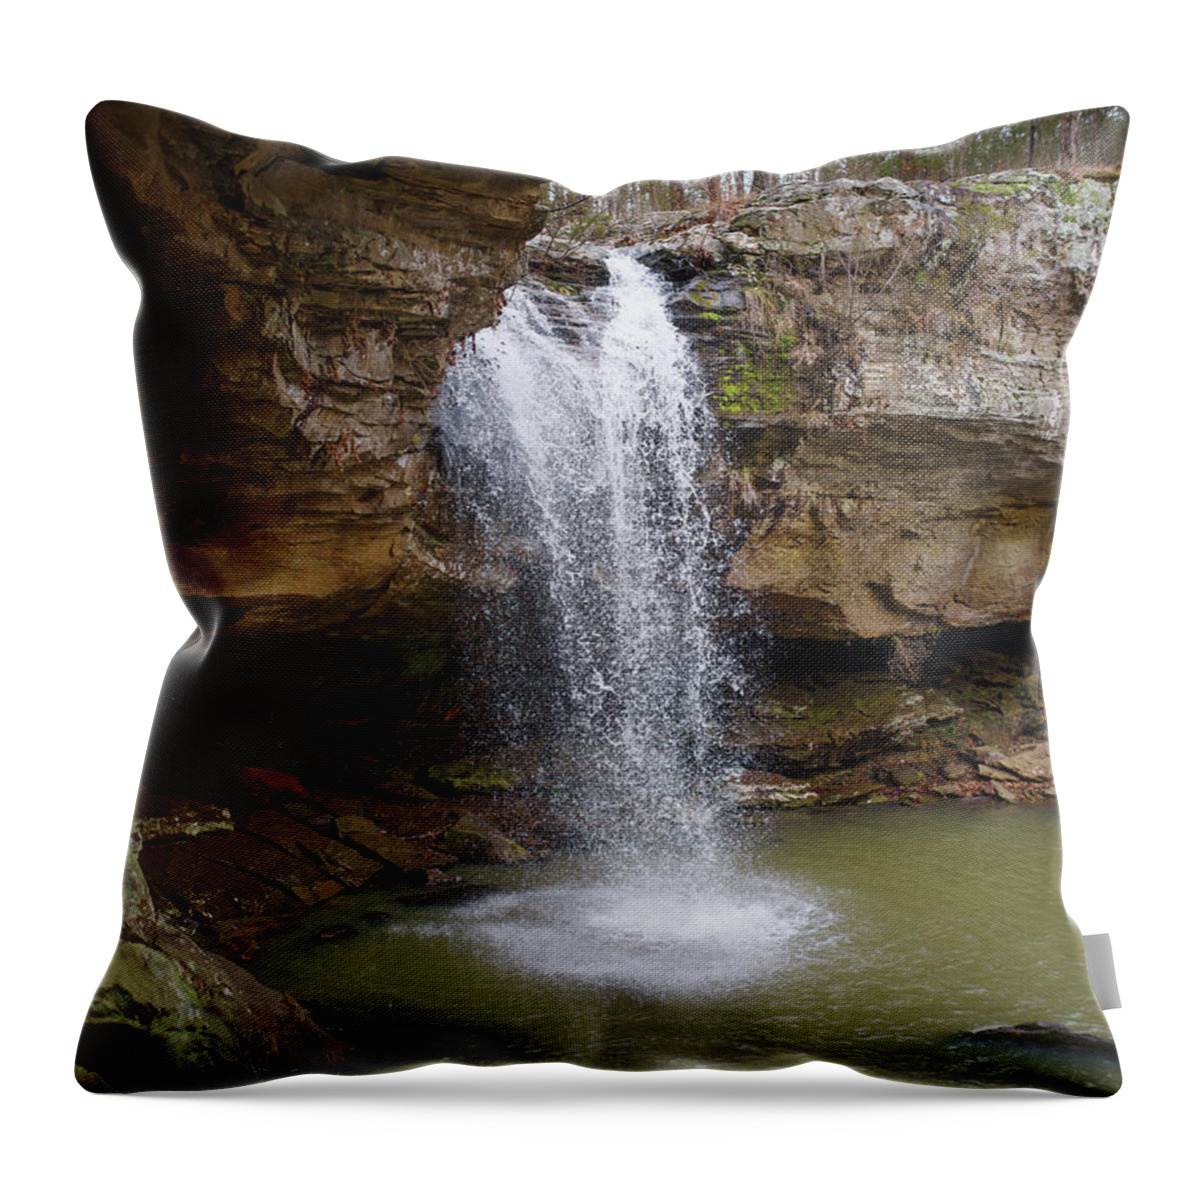 Waterfall Throw Pillow featuring the photograph Winter Shelter by Grant Twiss